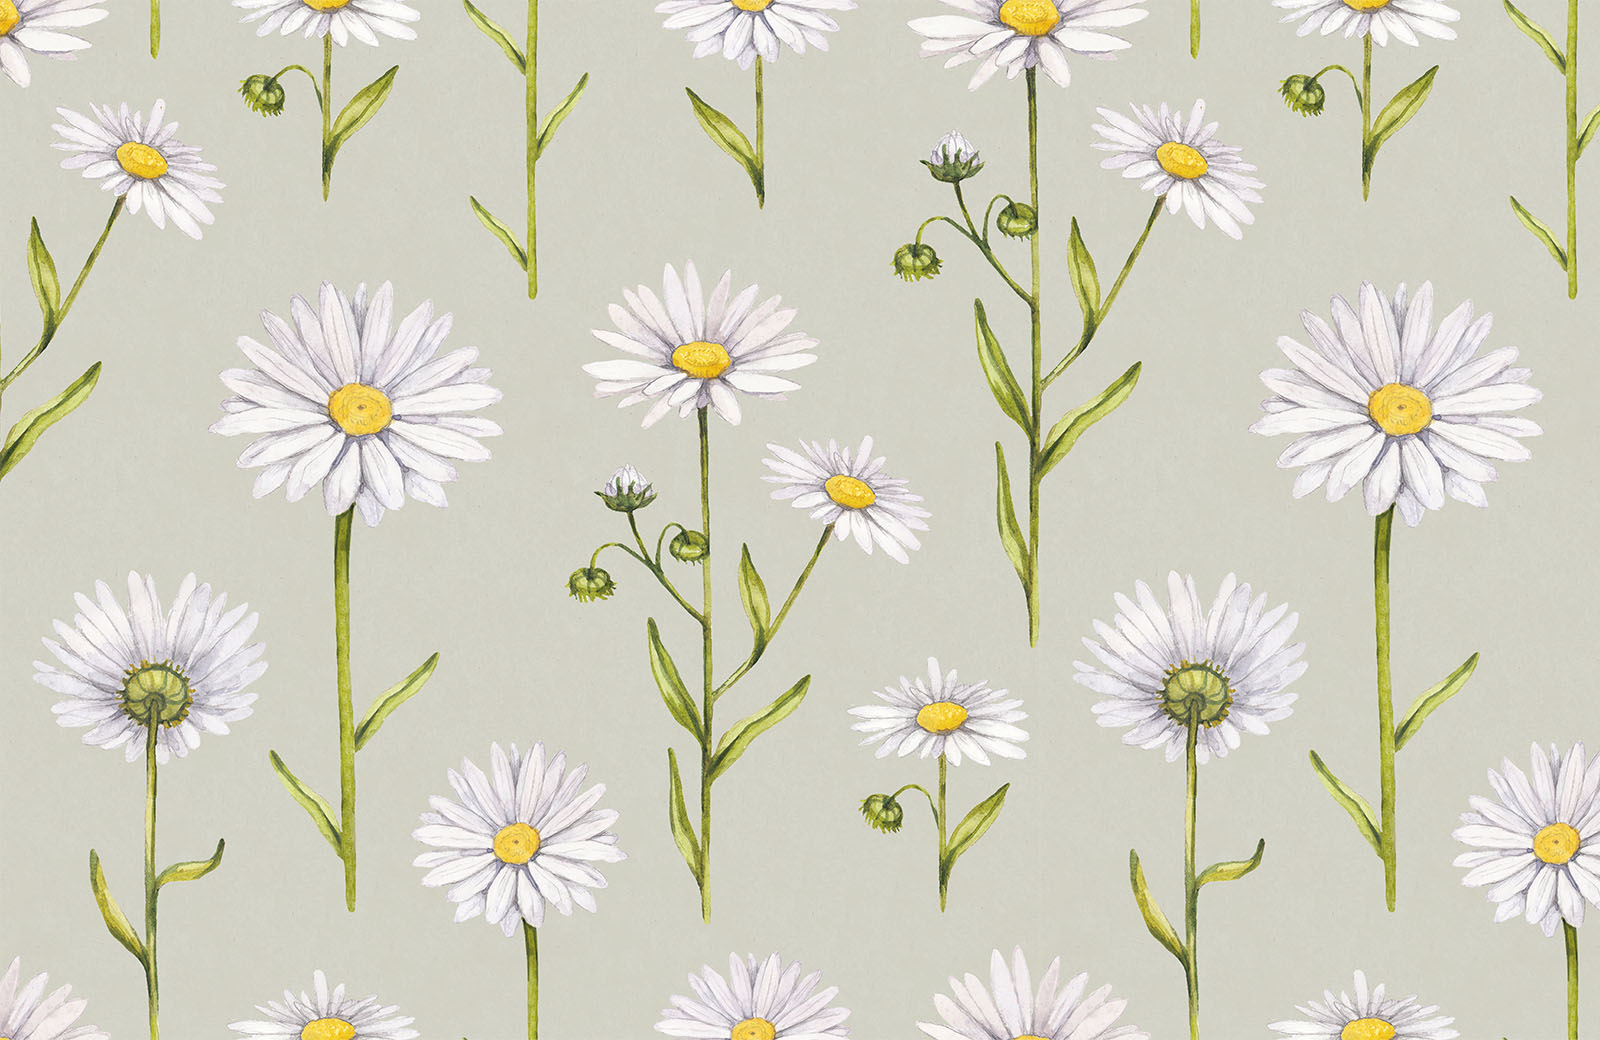 daisy-flower-with-stem-and-leaf-wallpaper-design